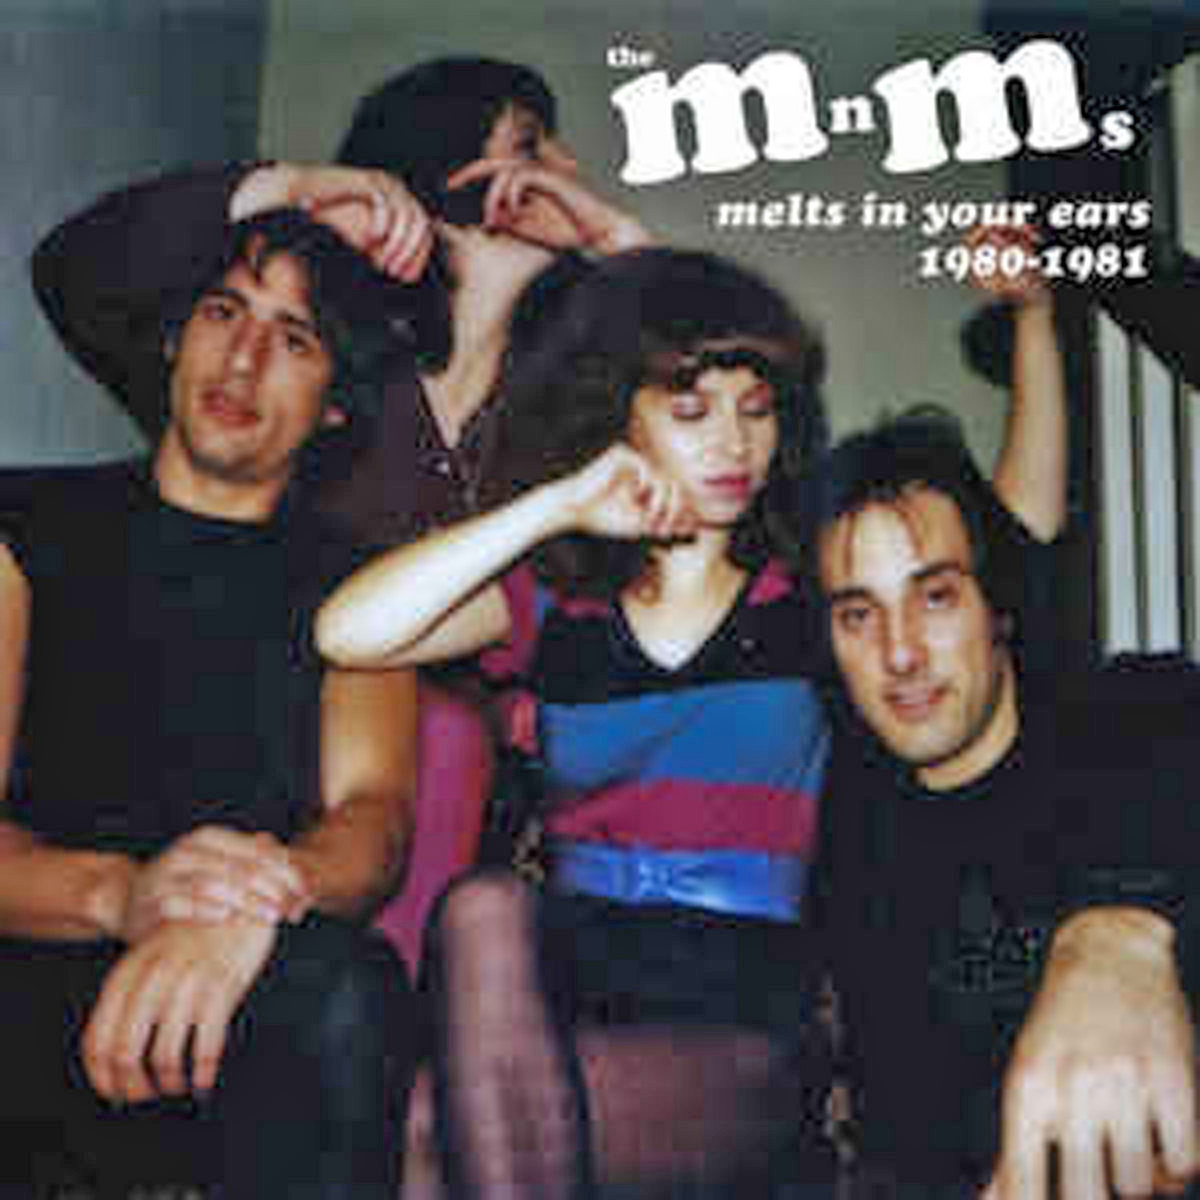 The MnMs - Melts In Your Ears 1980 - 1981 CD ~REISSUE!